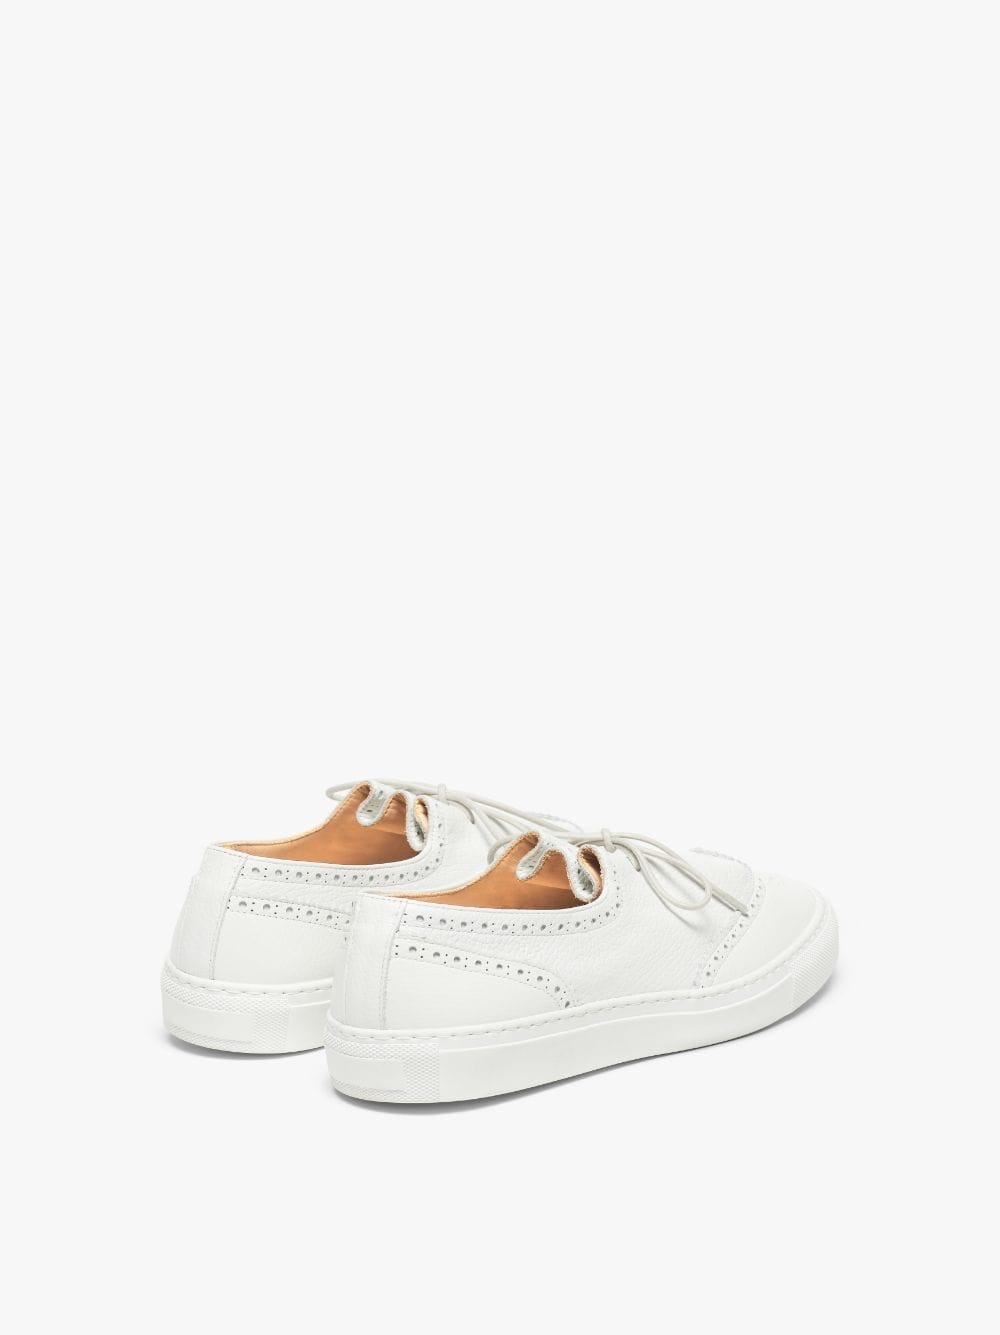 JACQUES SOLOVIÈRE WHITE LEATHER GOLF SNEAKERS - 4